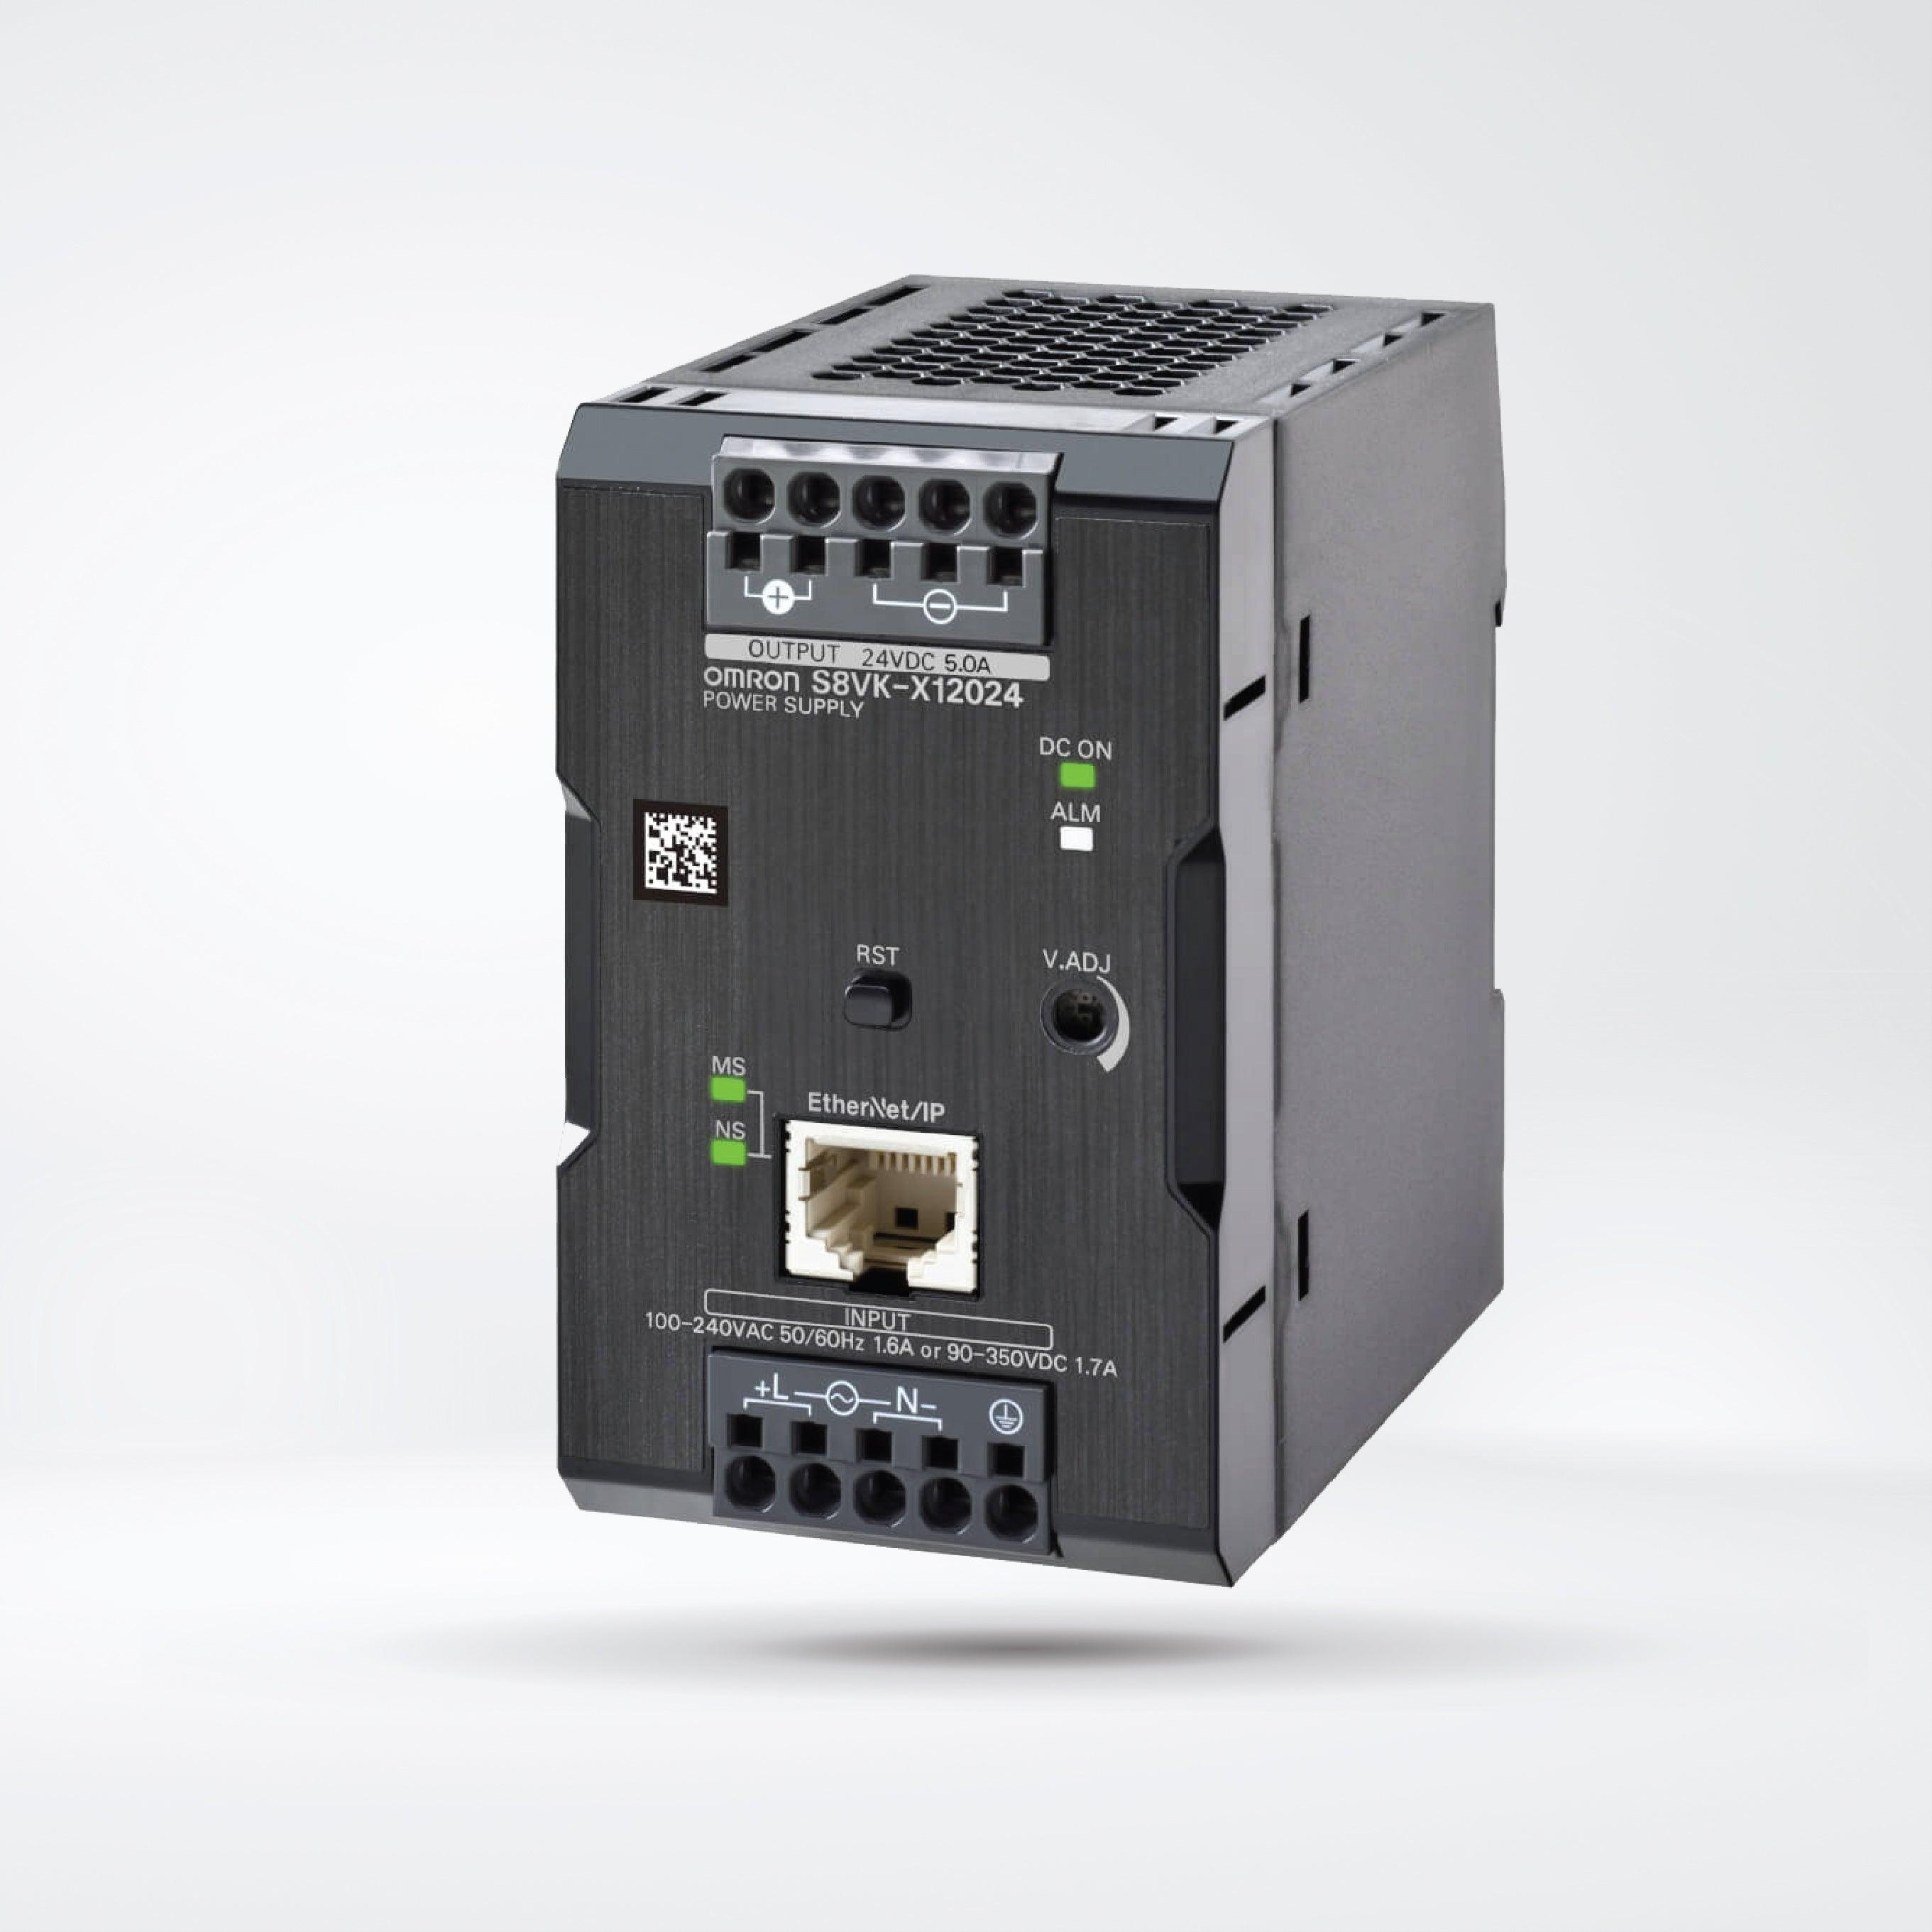 S8VK-X12024-EIP Switch Mode Power Supply, with EtherNet/IP, Modbus TCP,120 W, 24 VDC - Riverplus